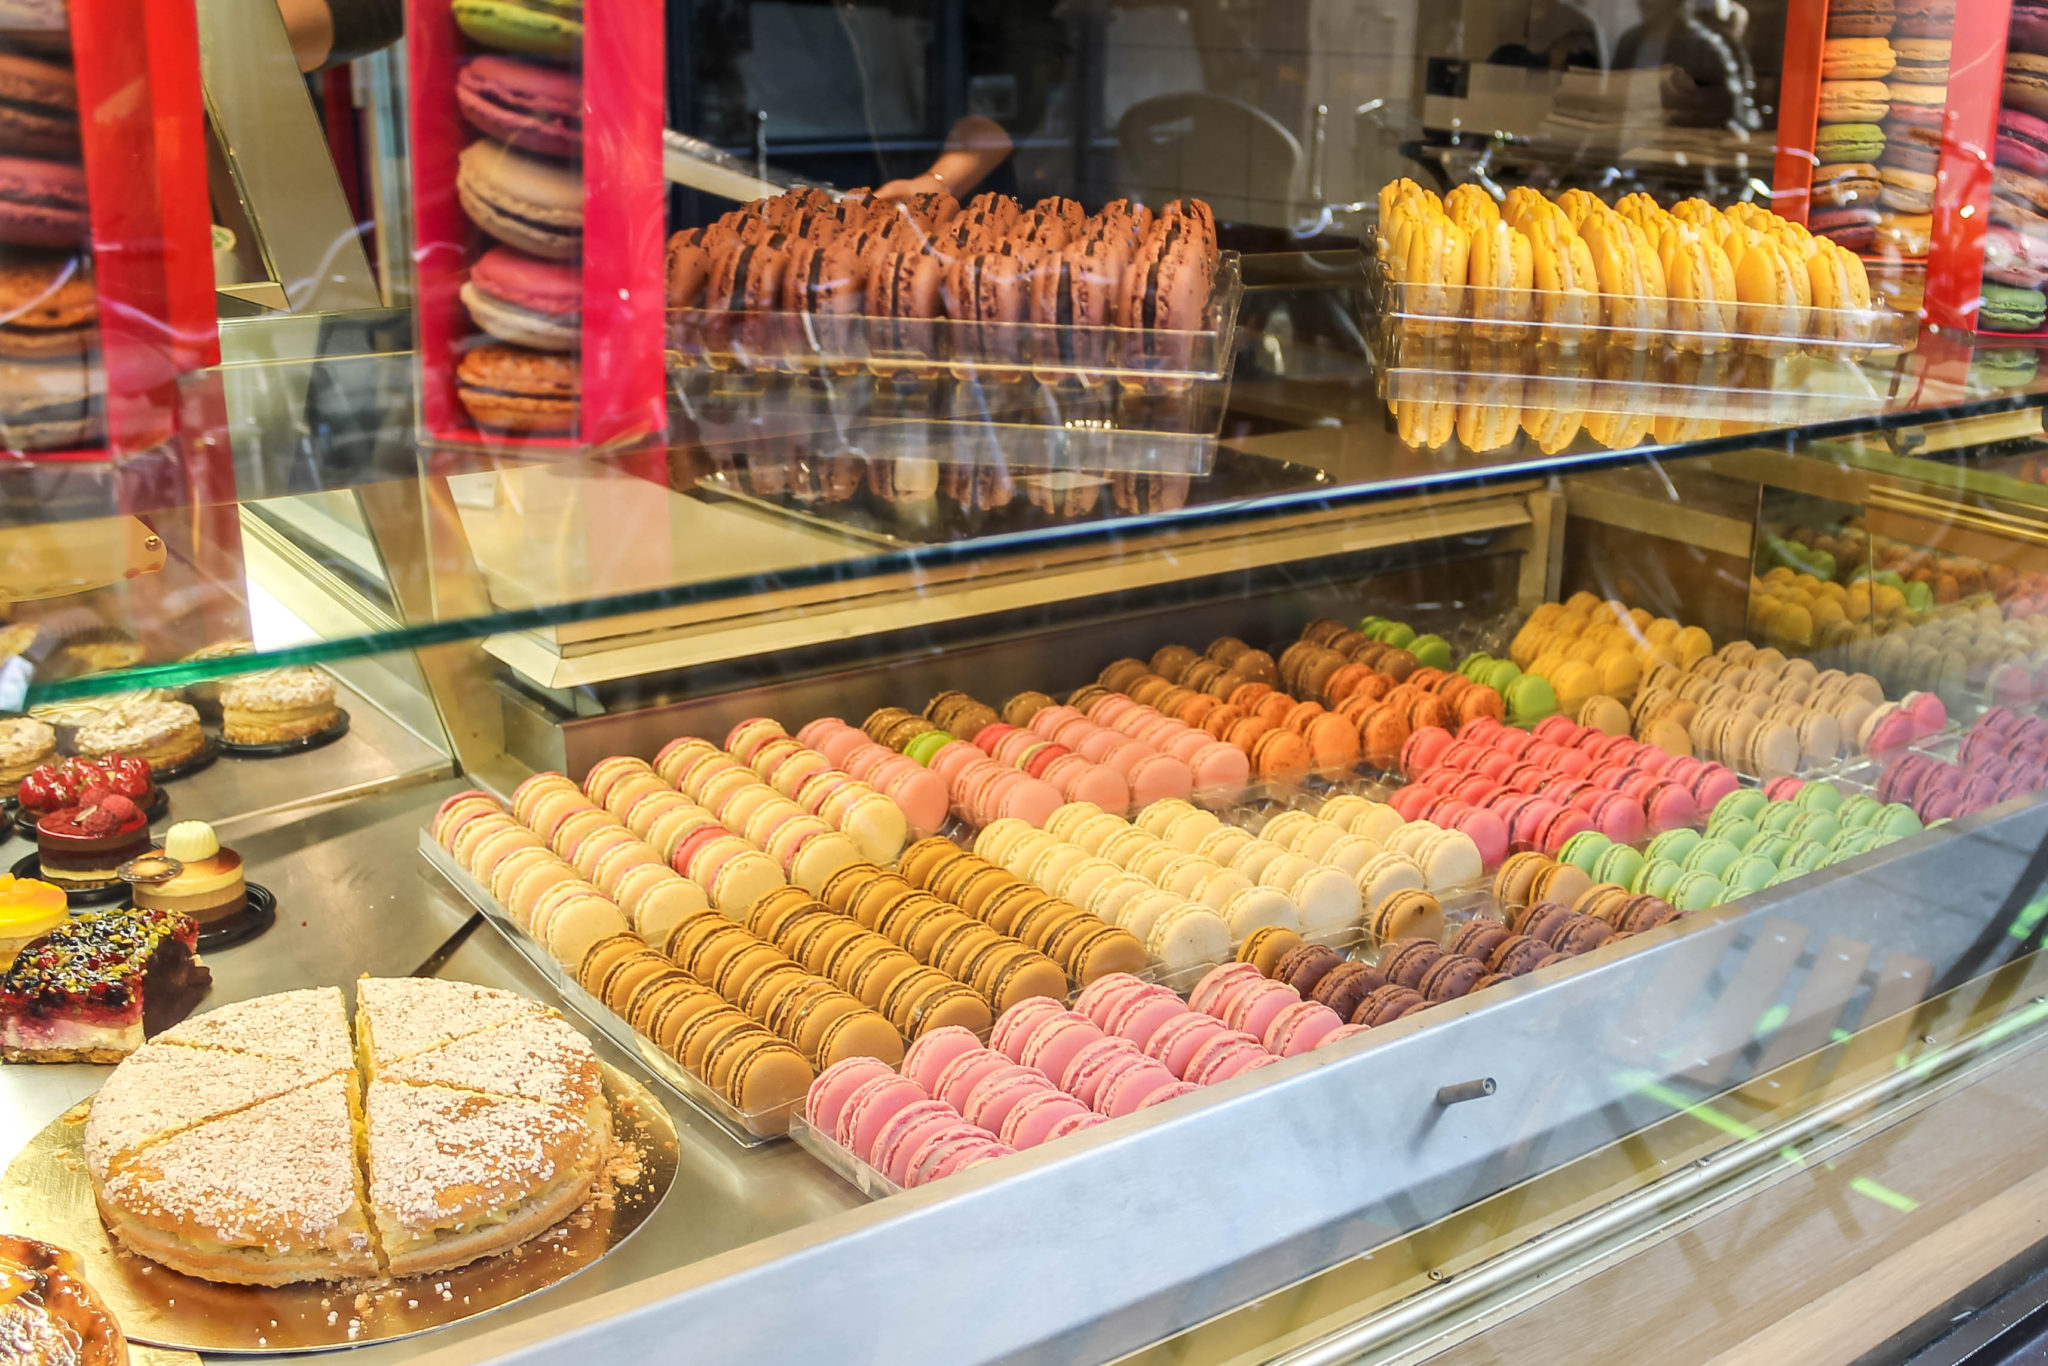 Display of macarons and pastries in Paris, France. Paris has some of the best French desserts in the world. With everything from caramels to macarons and eclairs, don't miss these top dessert spots in Paris on your visit to the city.